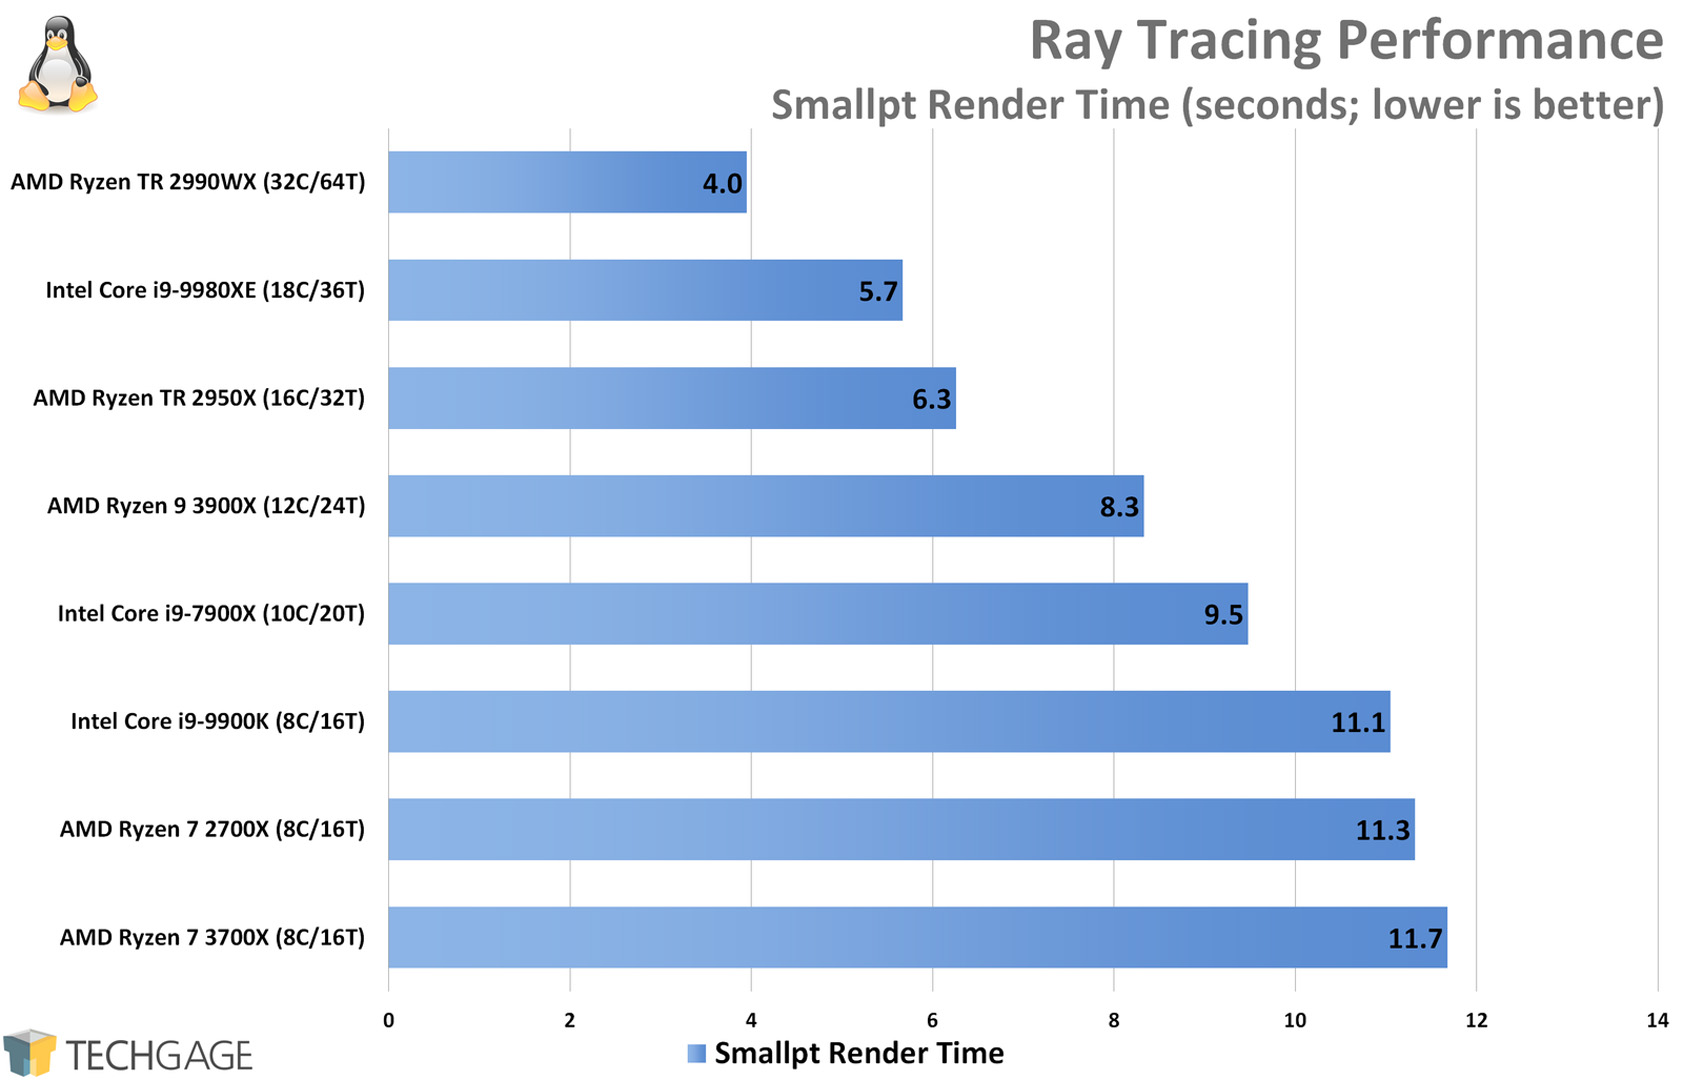 Ray Tracing Performance (Smallpt, AMD Ryzen 9 3900X and 7 3700X)